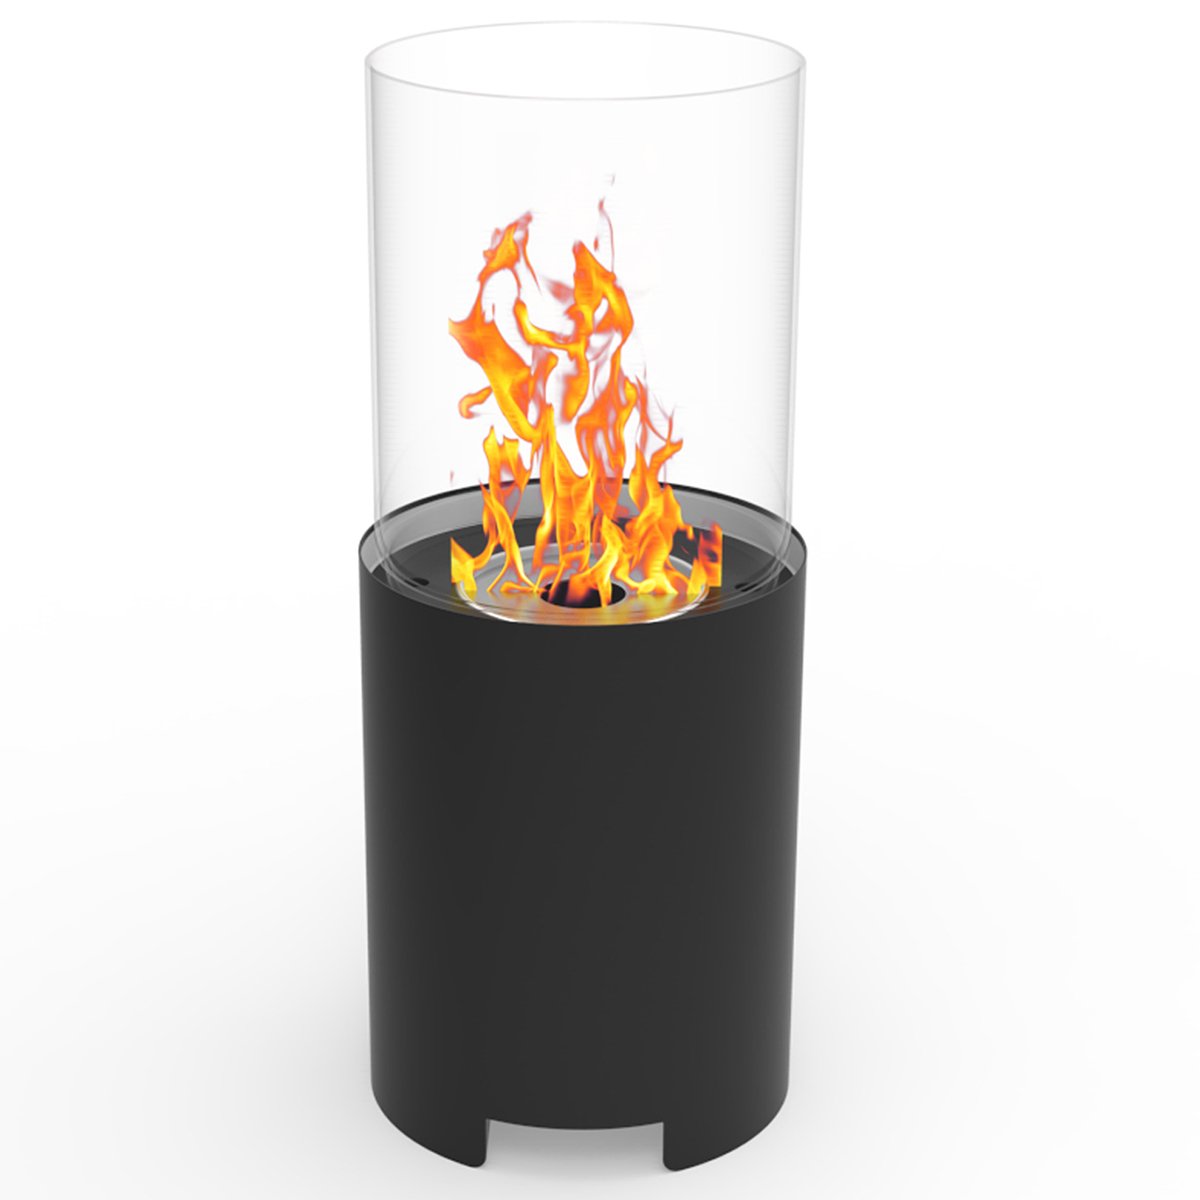 Fireplace Gel Fuel Cans Best Of Regal Flame Capelli Ventless Indoor Outdoor Fire Pit Tabletop Portable Fire Bowl Pot Bio Ethanol Fireplace In Black Realistic Clean Burning Like Gel